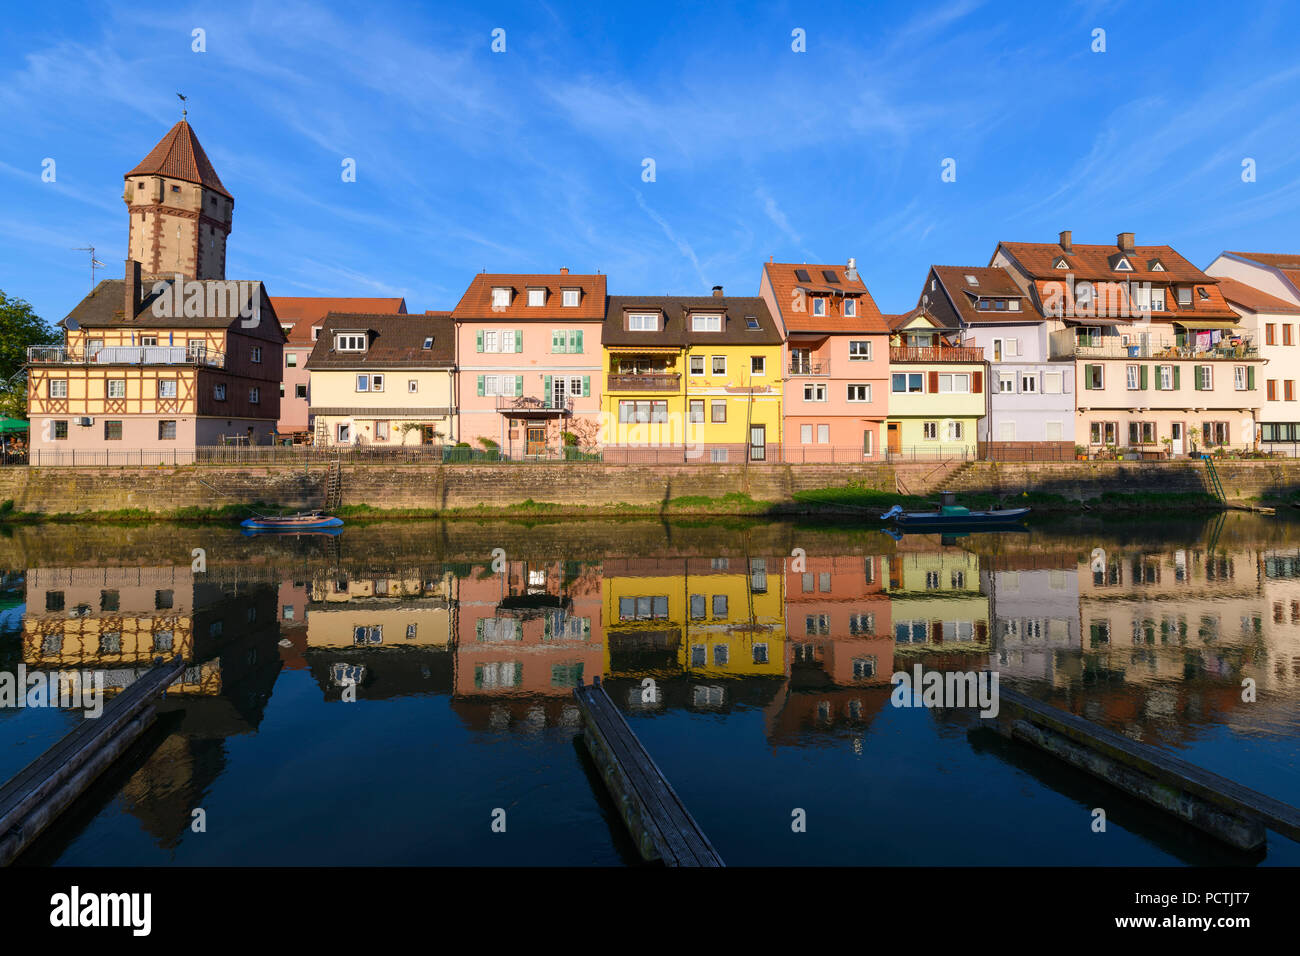 Tauber river with colorful fisher houses and Spitzer tower, Wertheim, River Tauber, Tauberfranken, Spessart, Franconia, Main-Tauber-district, Baden-Württemberg, Germany Stock Photo